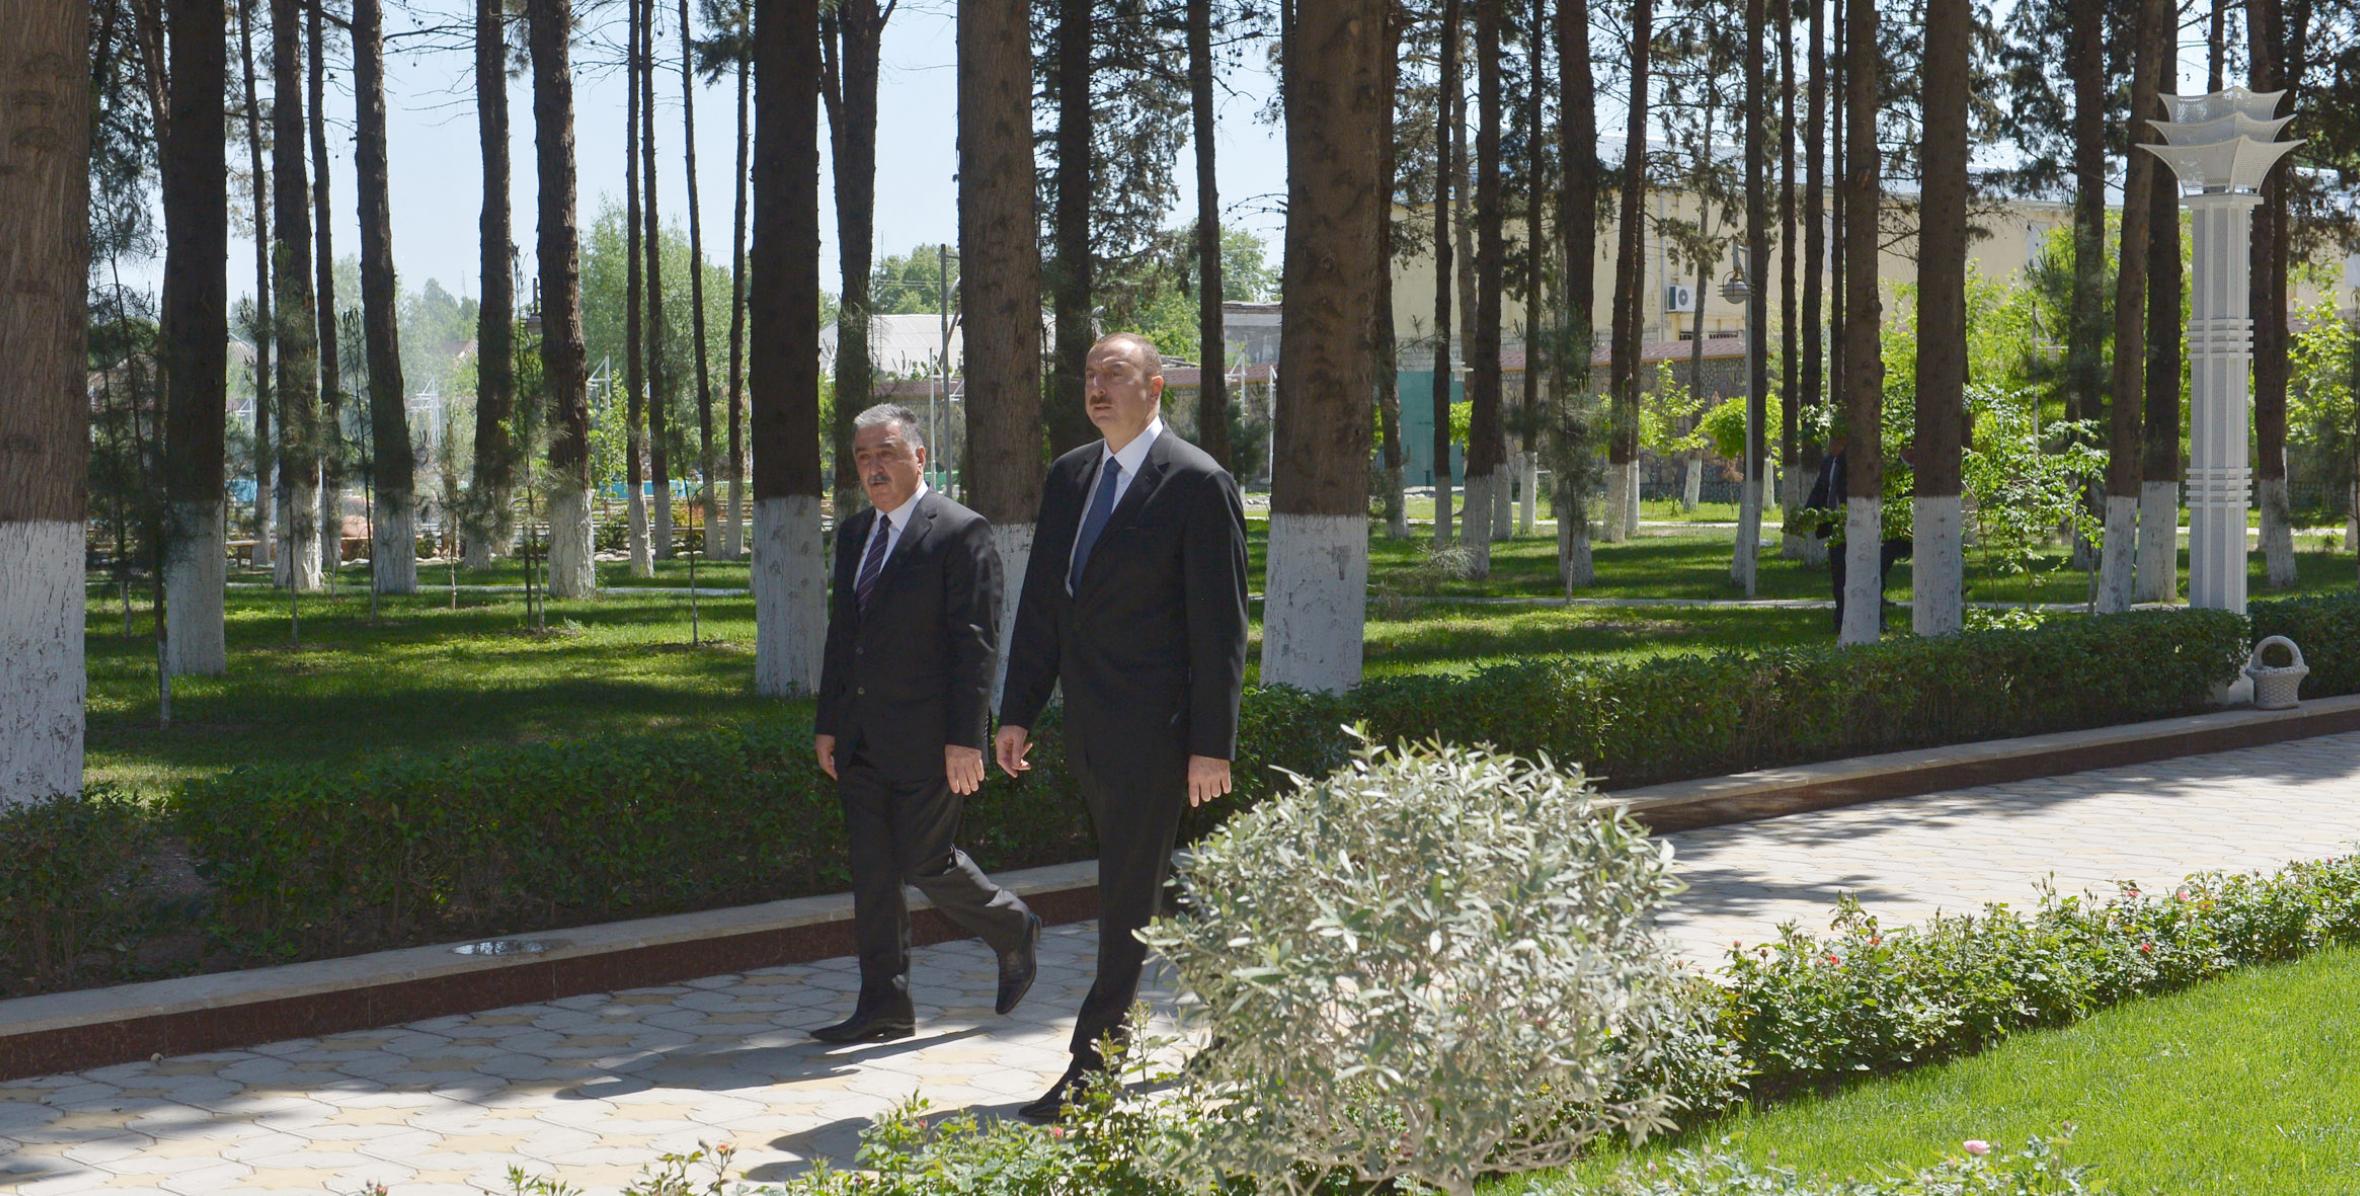 As part of a visit to Agdash, Ilham Aliyev reviewed the progress of reconstruction of the Heydar Aliyev Park